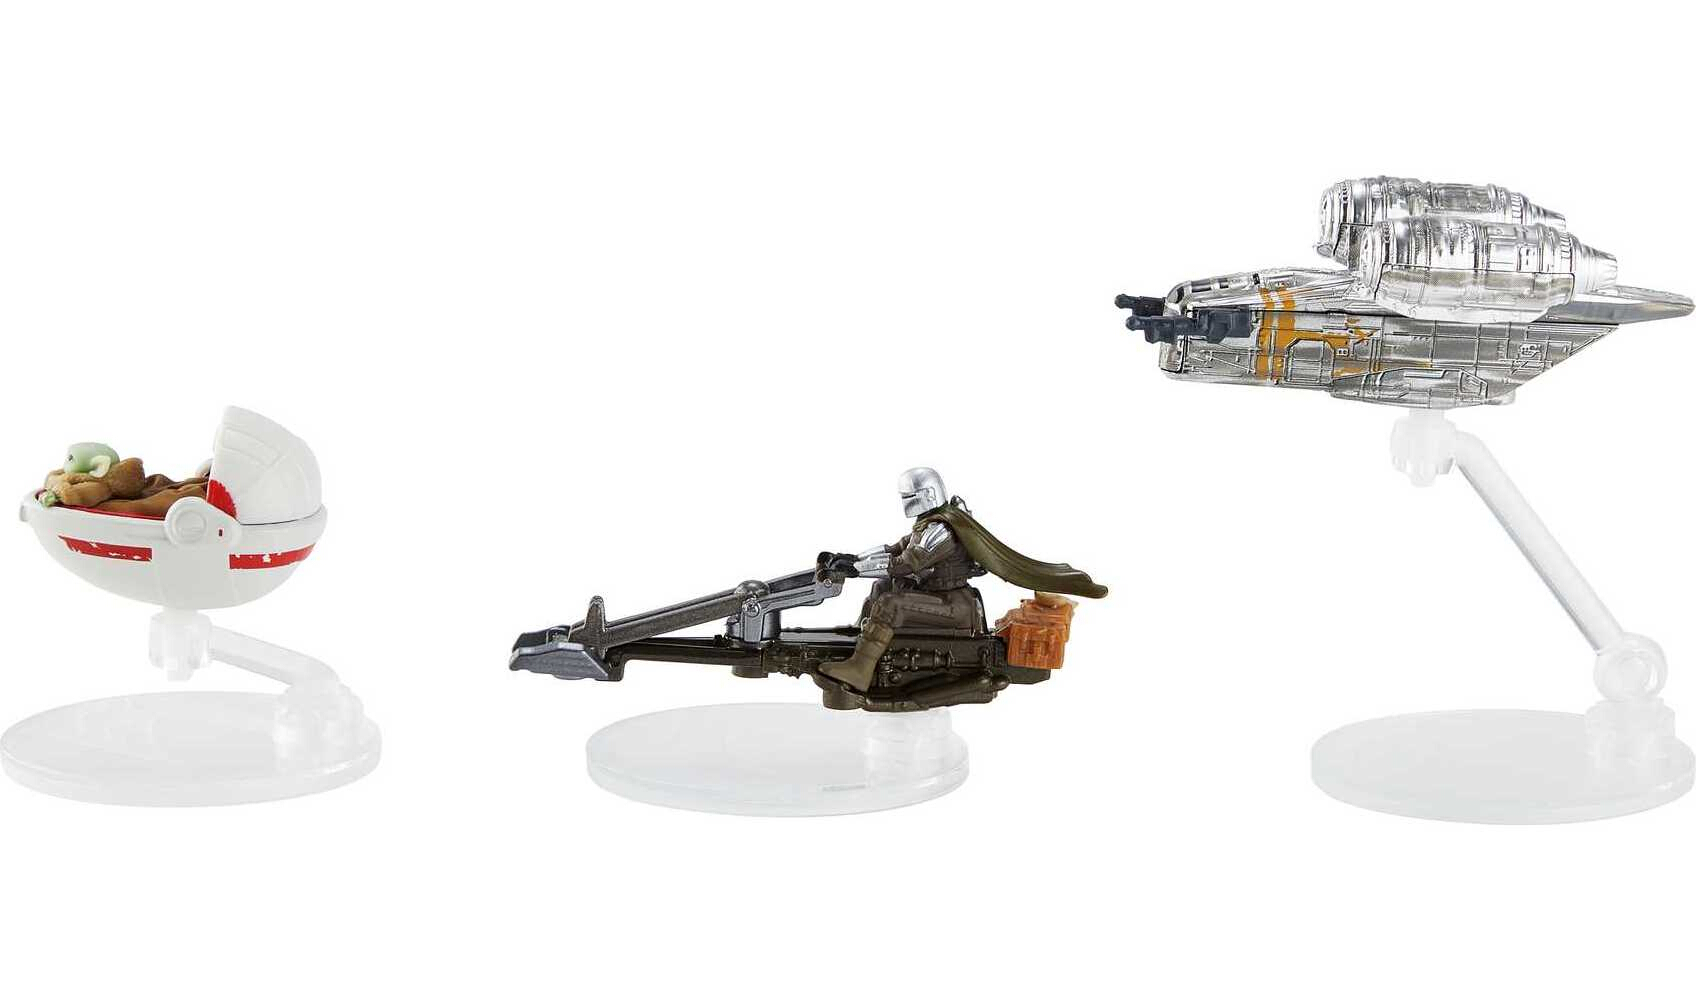 Hot Wheels Star Wars Starships 3-Pack Inspired by The Mandalorian, Set of 3 Die-Cast Ships - image 1 of 4